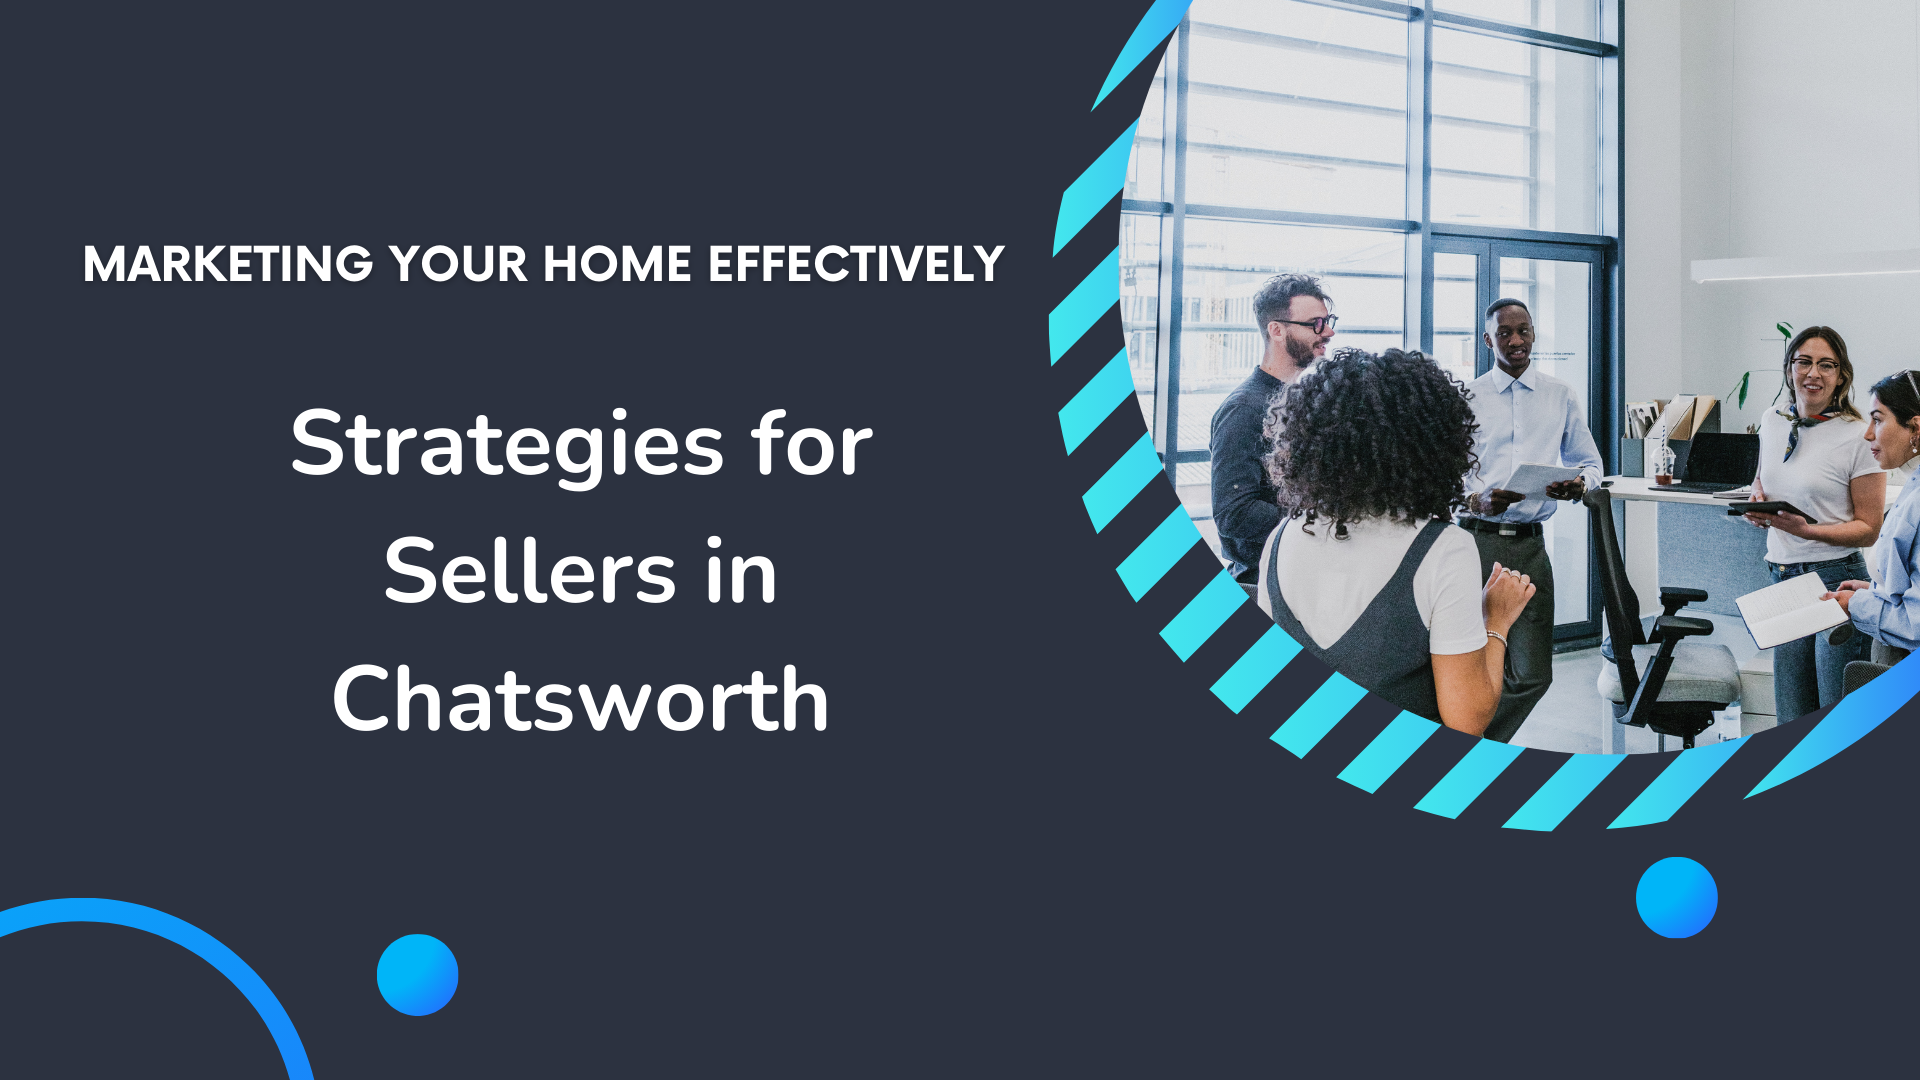 Marketing Your Home Effectively: Strategies for Sellers in Chatsworth